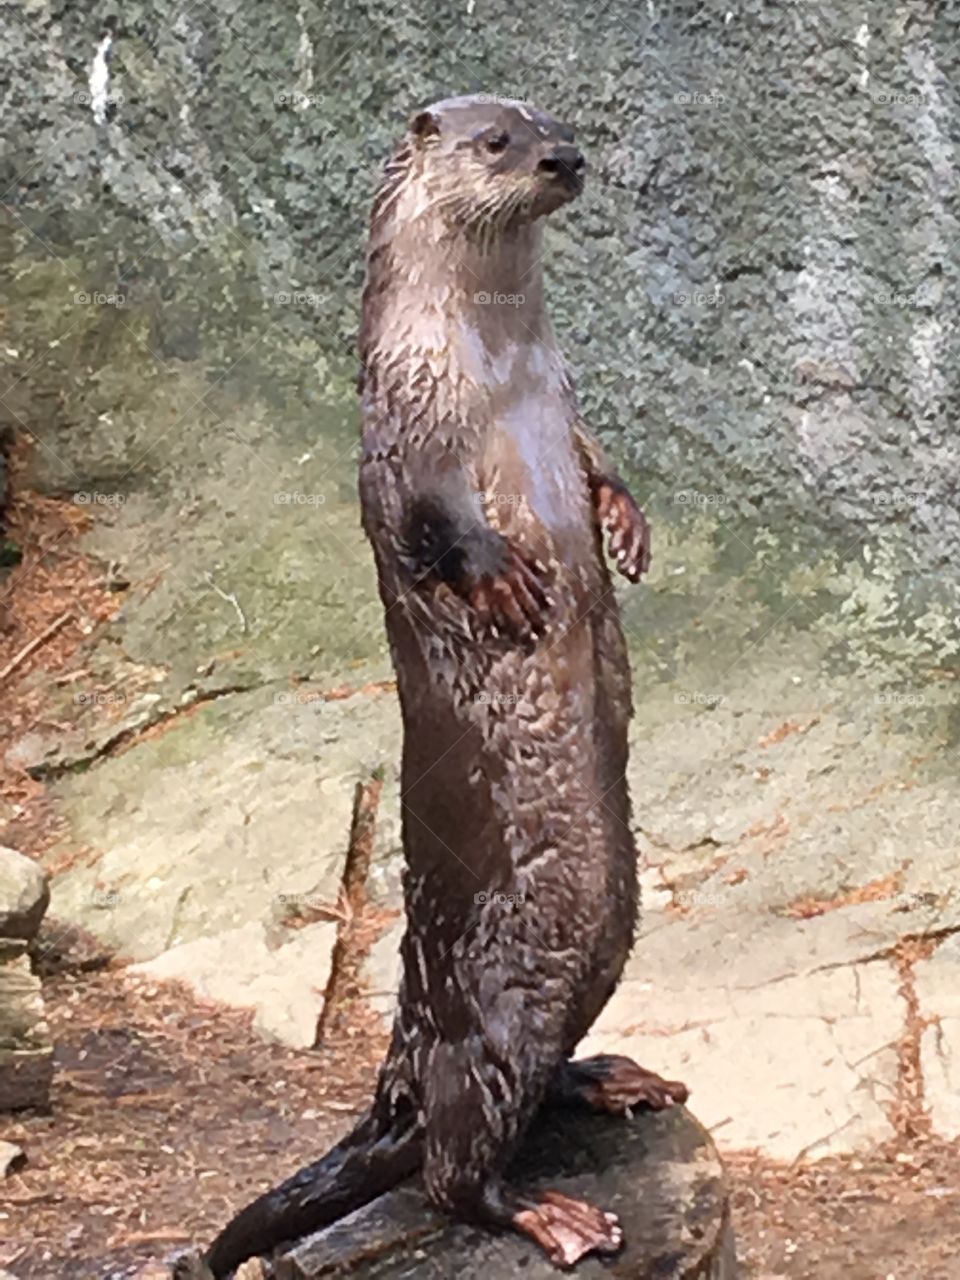 Water otter at zoo at Beardsley Zoo in Bridgeport, CT